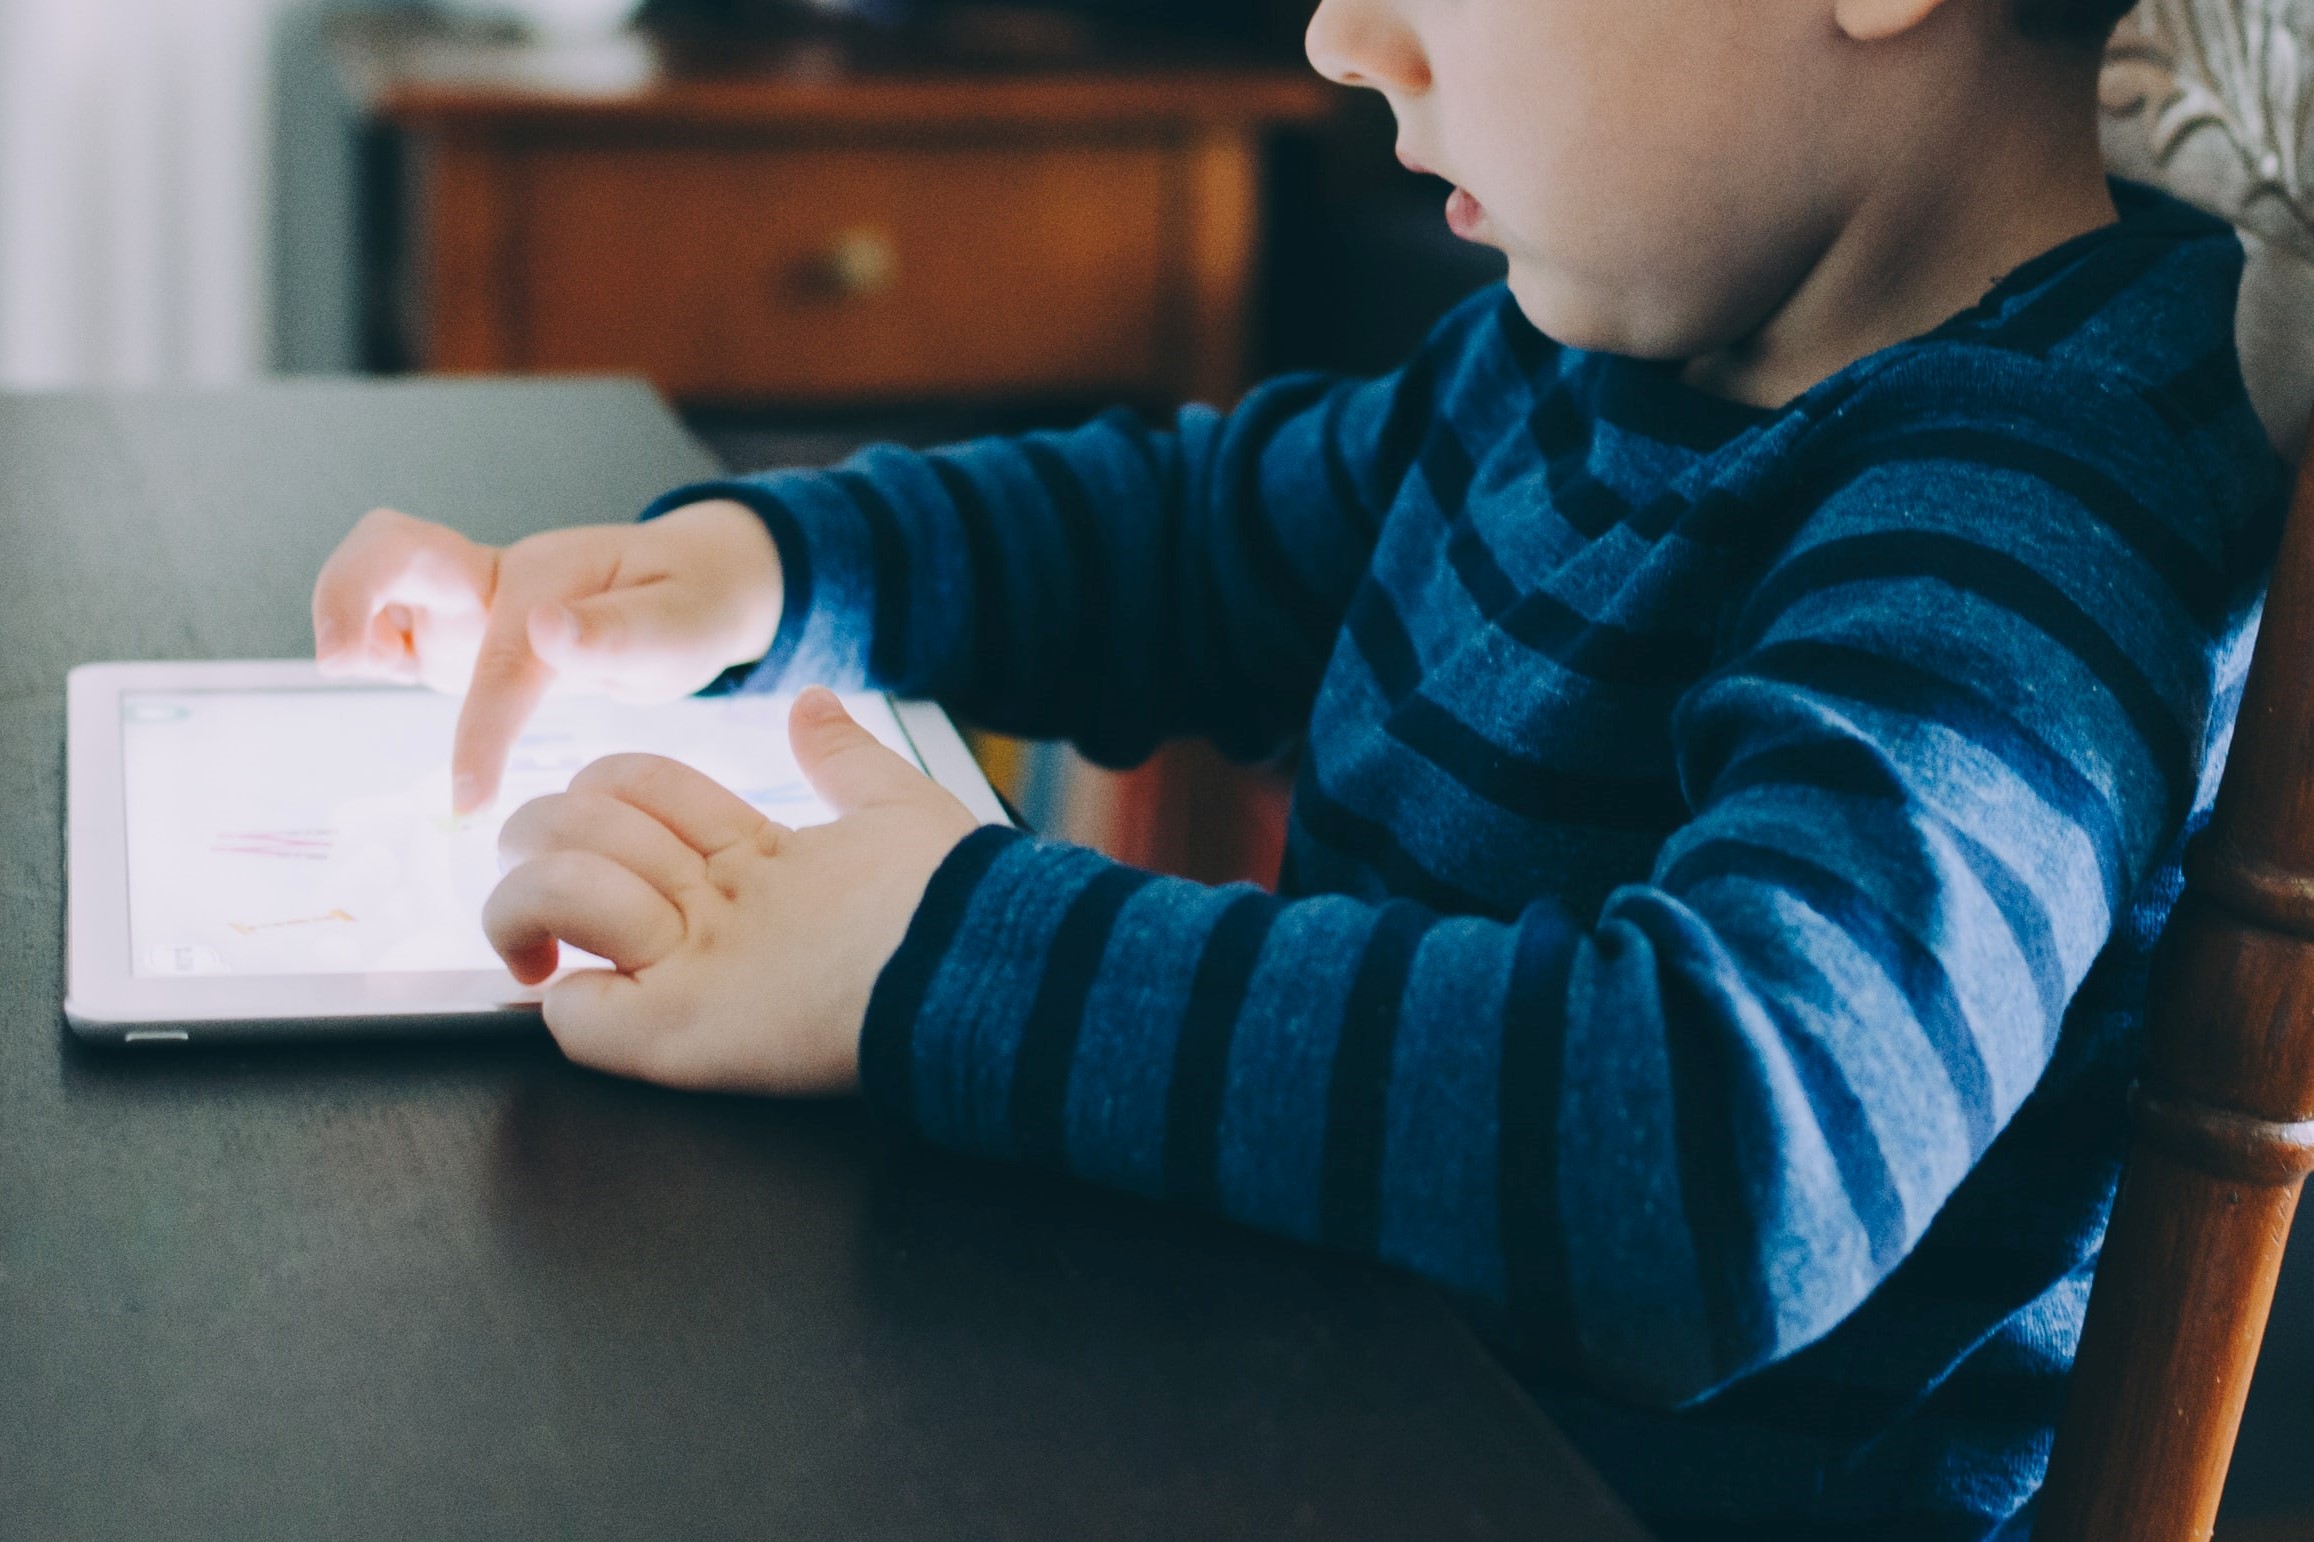 A photograph of a child using both hands to interact with a tablet at a table.